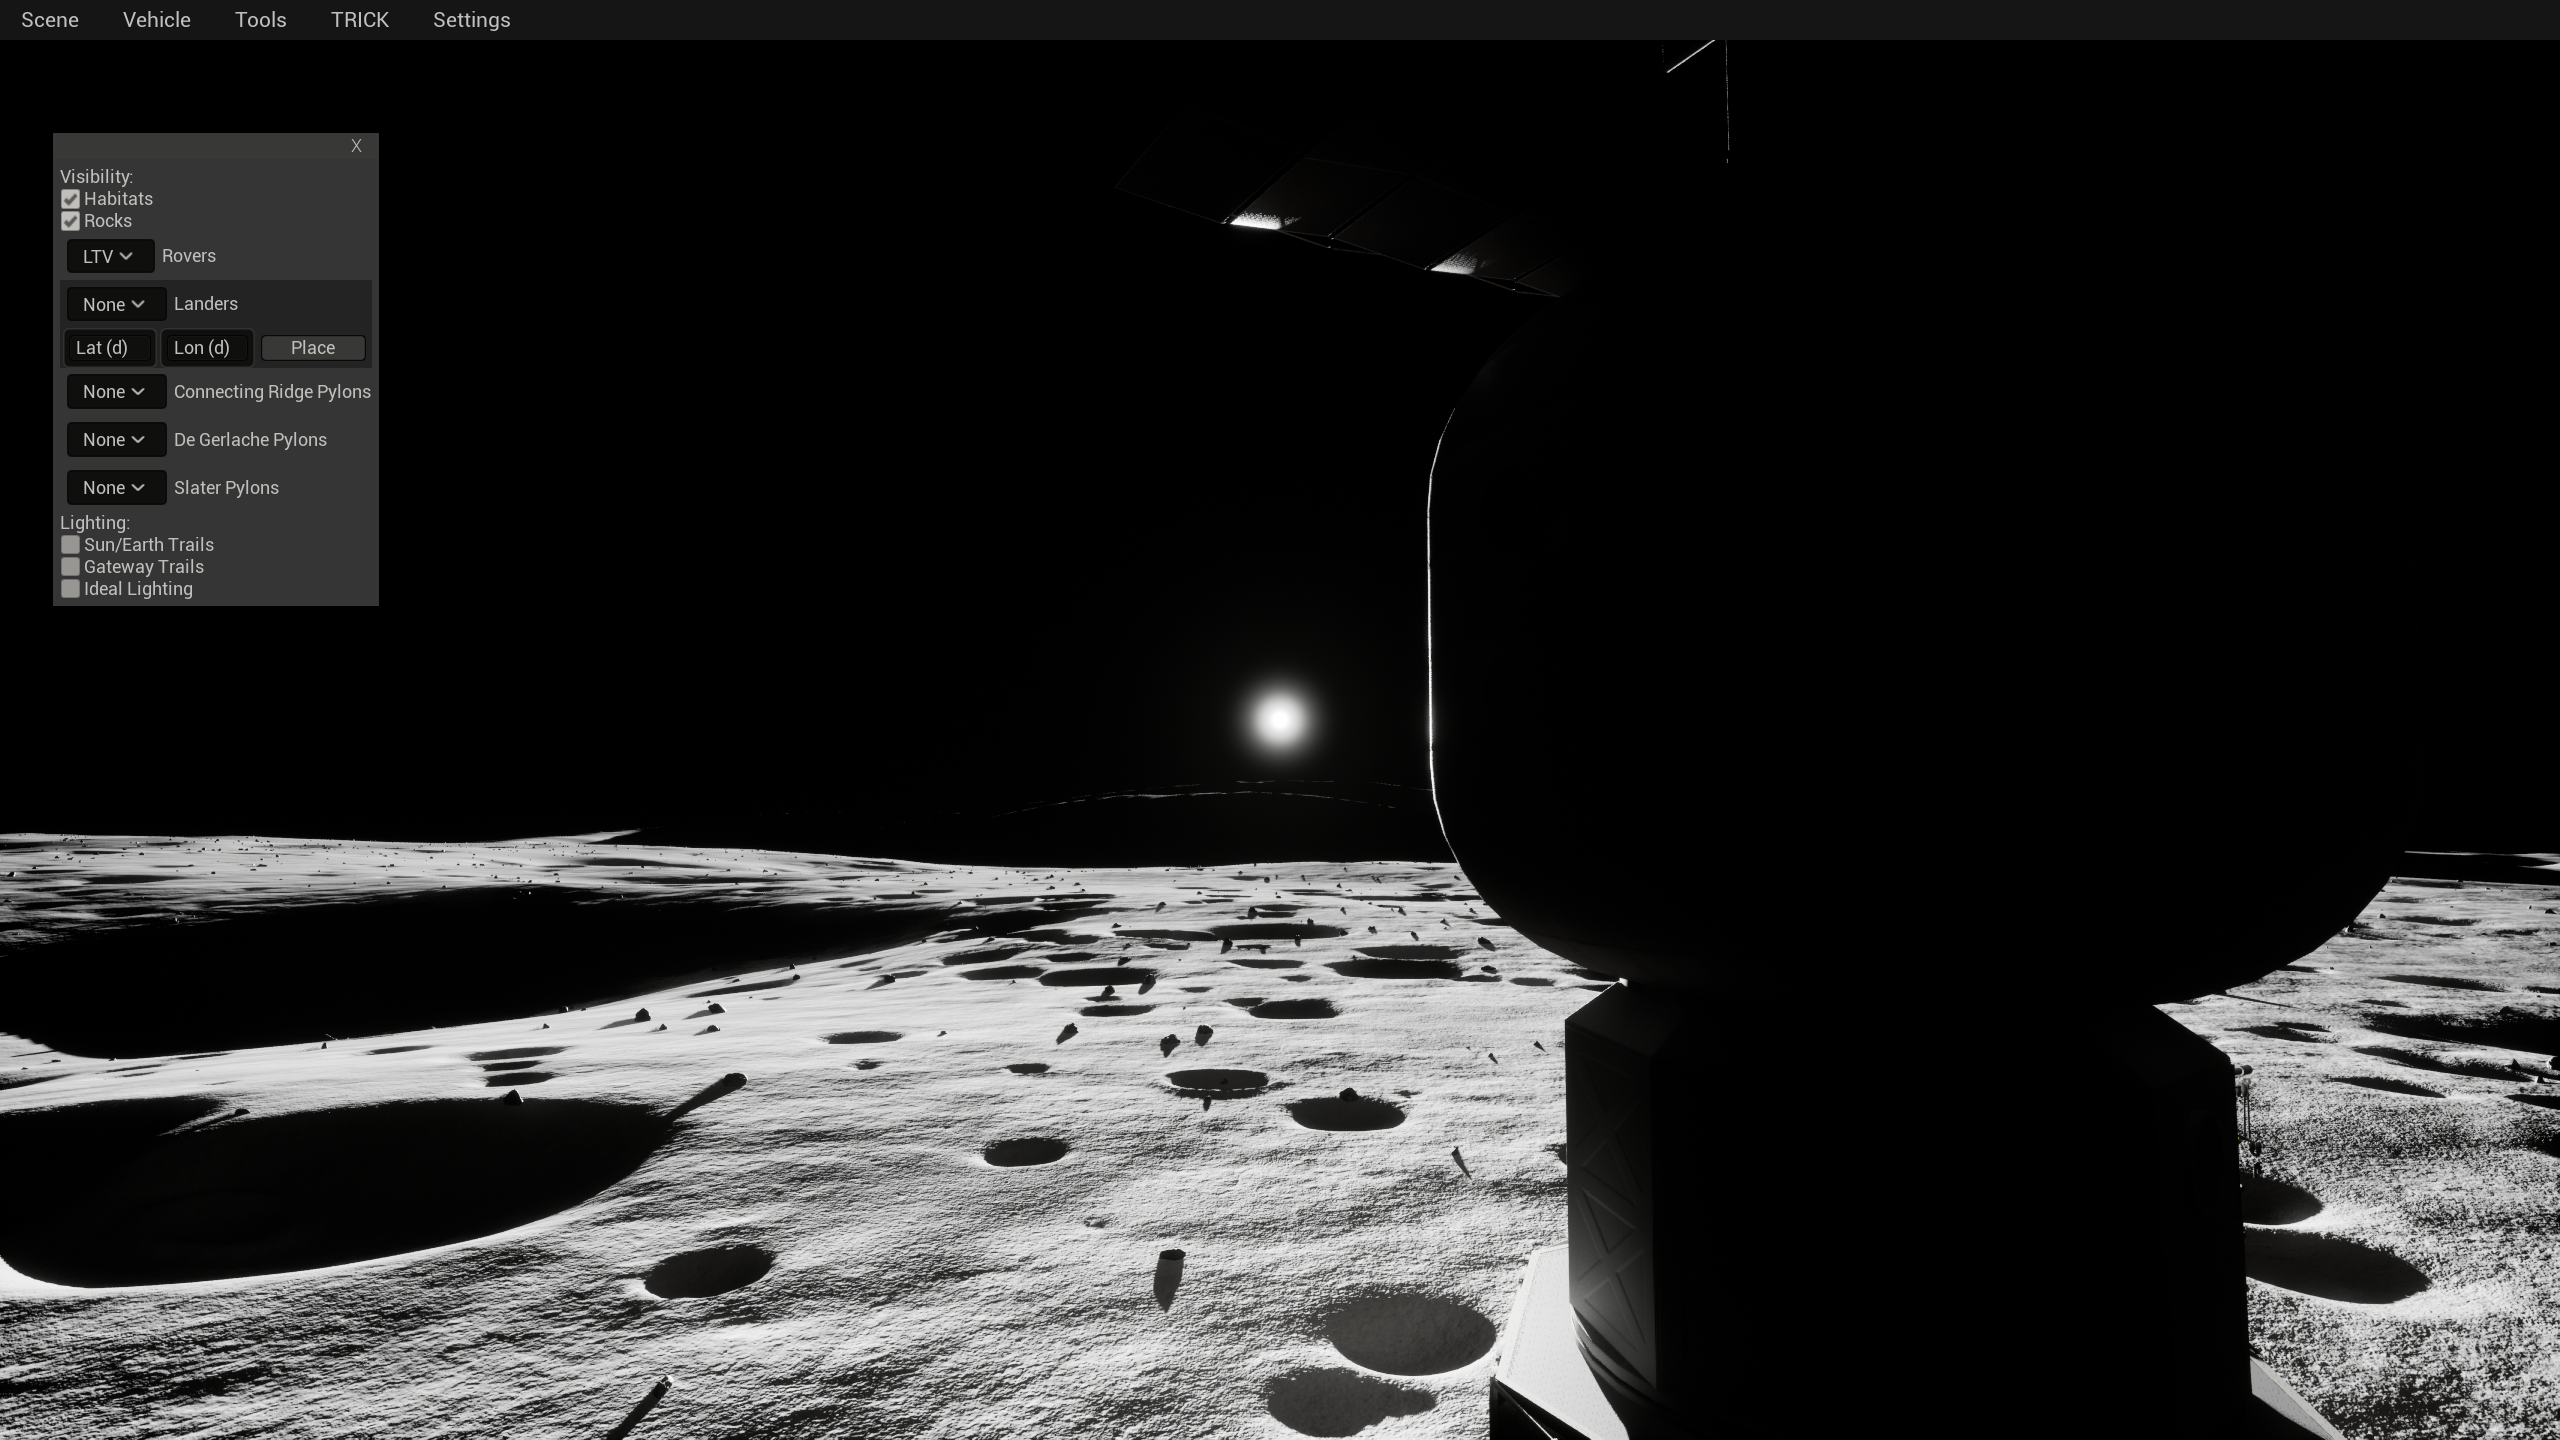 A simulation of the moon